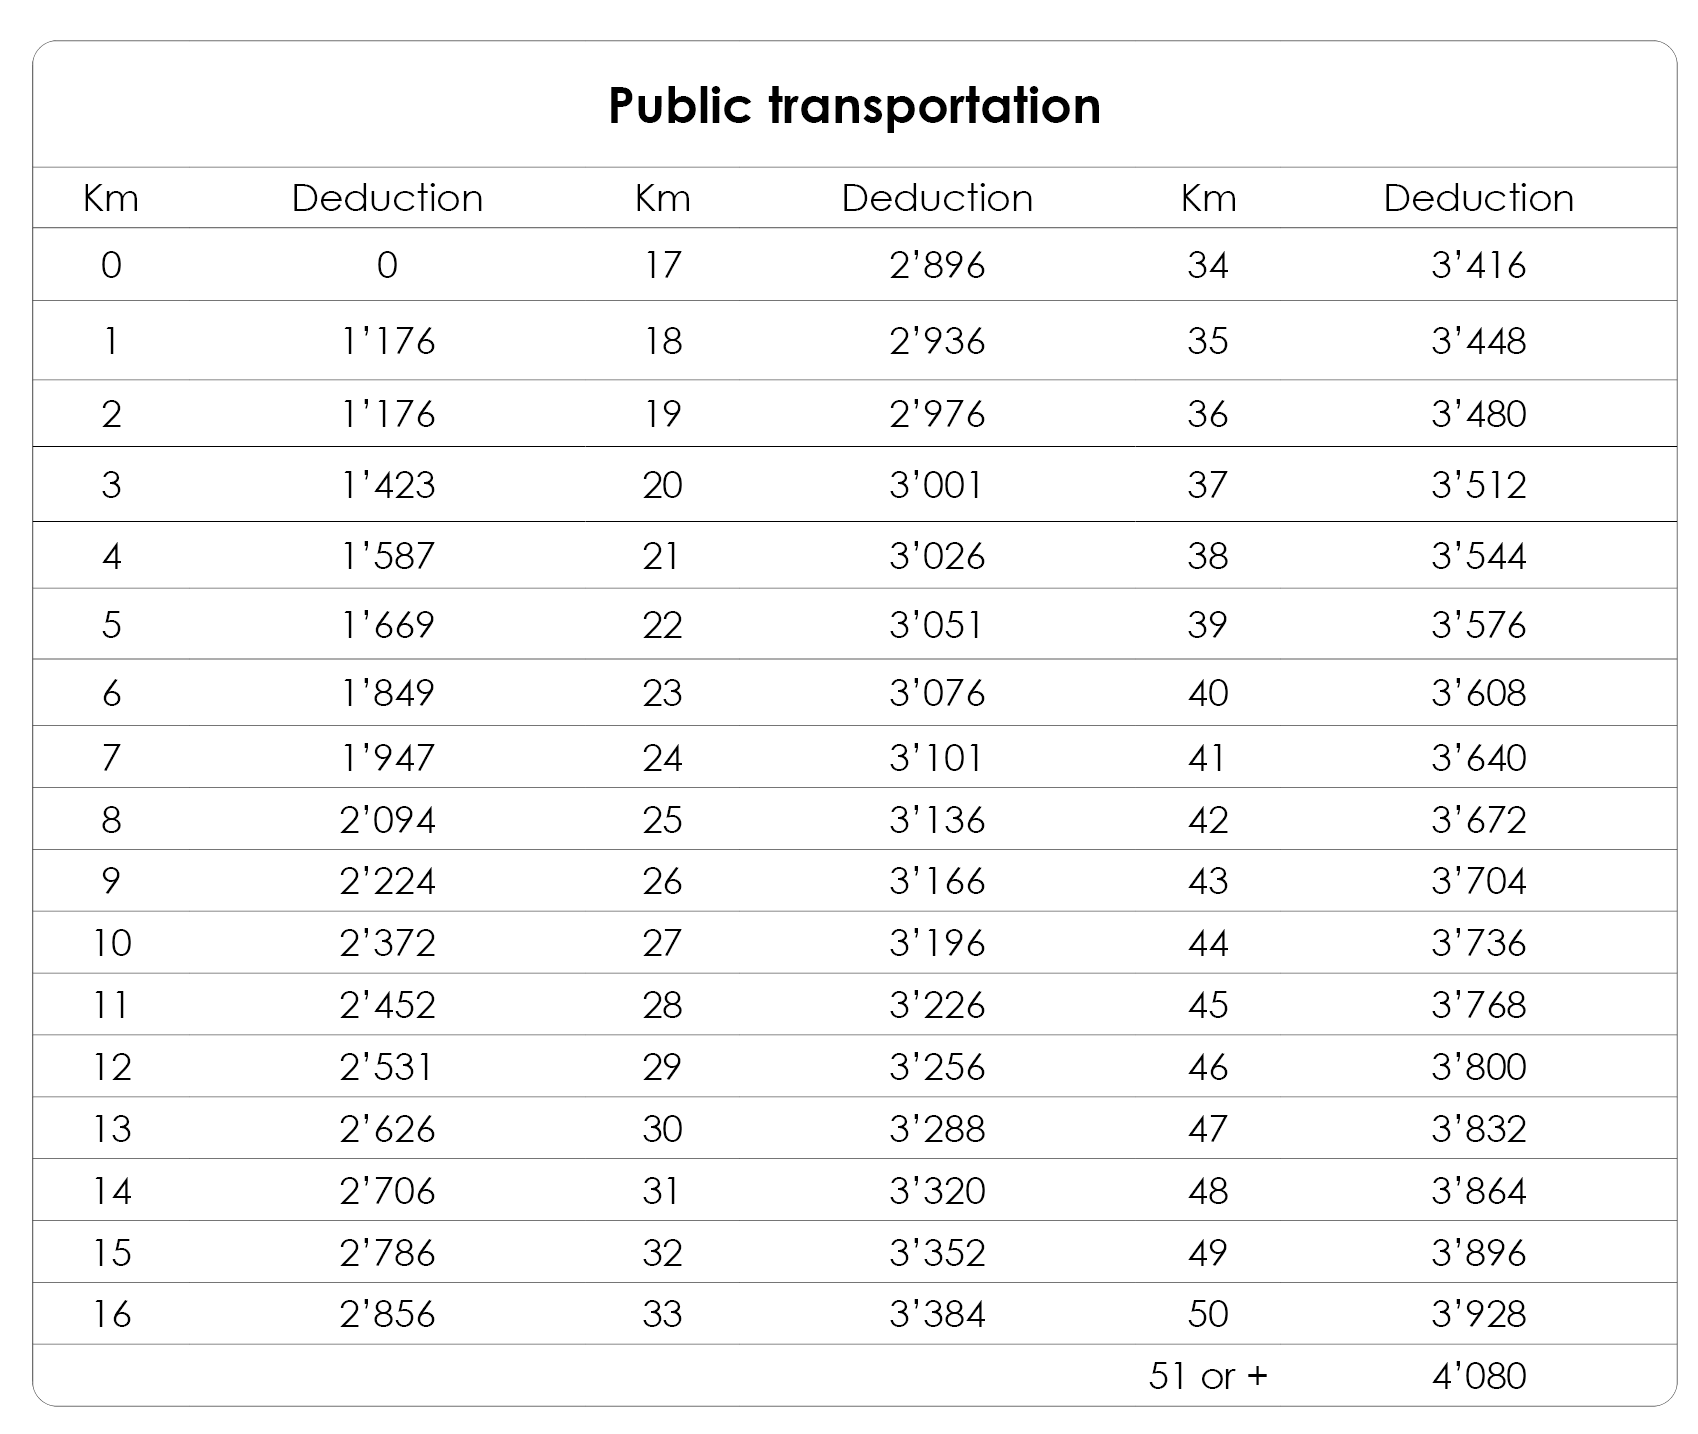 Table showing the allowable tax deduction for car transport according to the number of kilometres travelled from our place of work to our home 